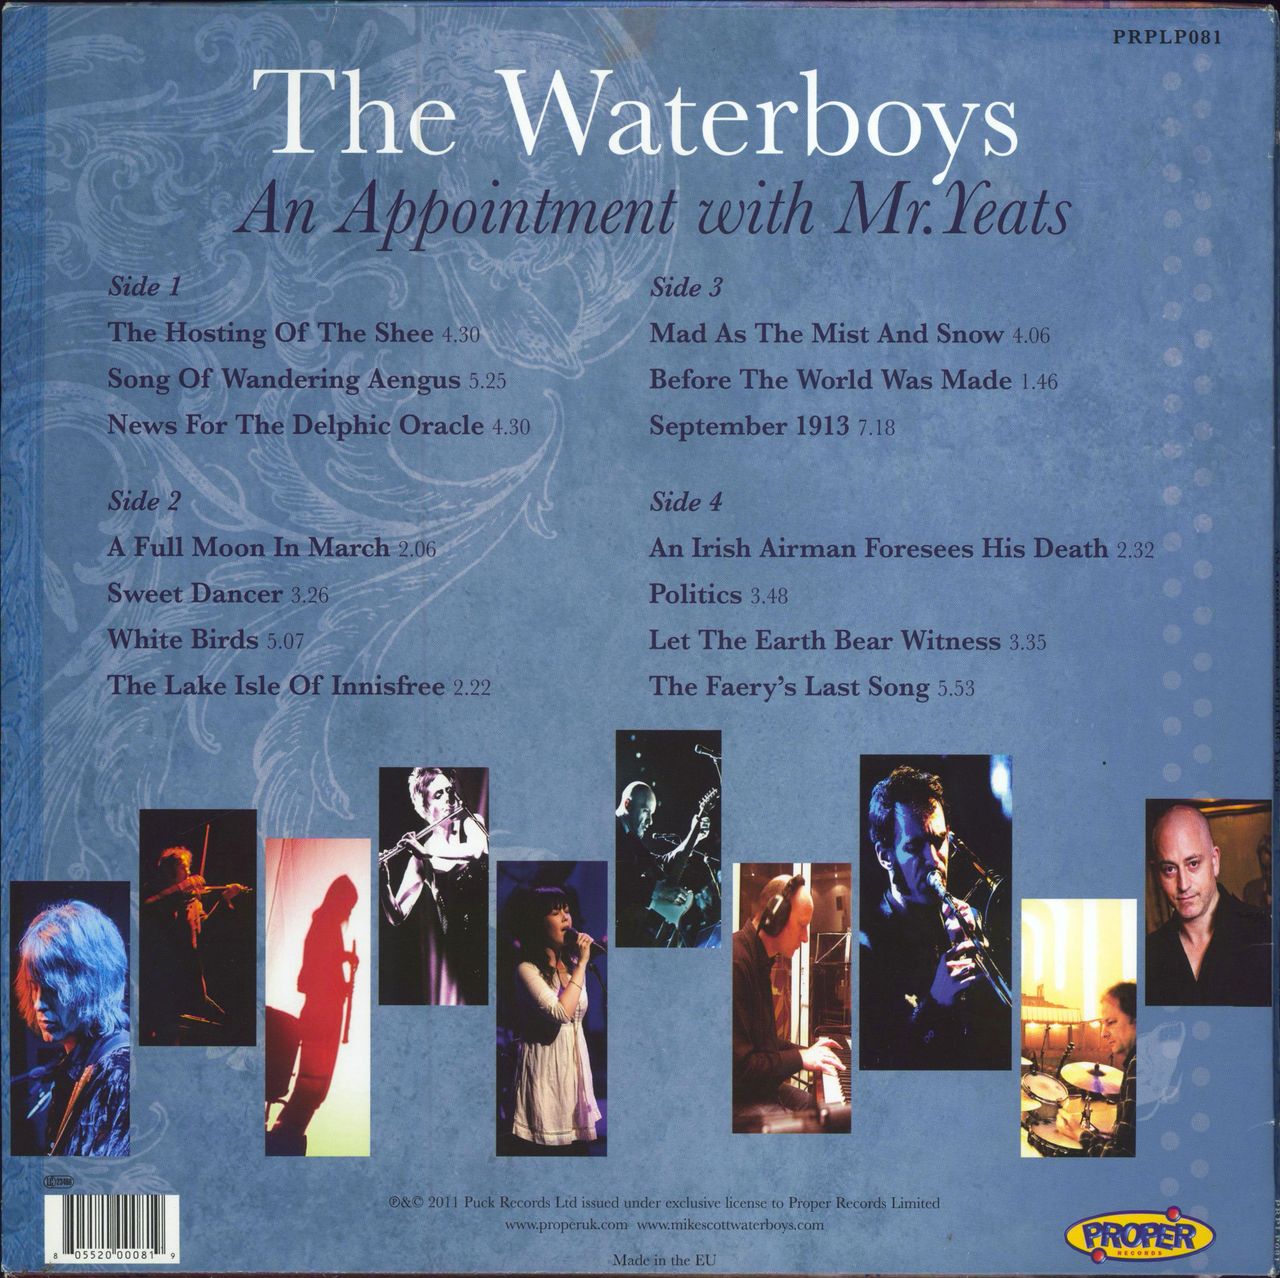 The Waterboys An Appointment With Mr Yeats UK 2-LP vinyl record set (Double LP Album) 805520000819